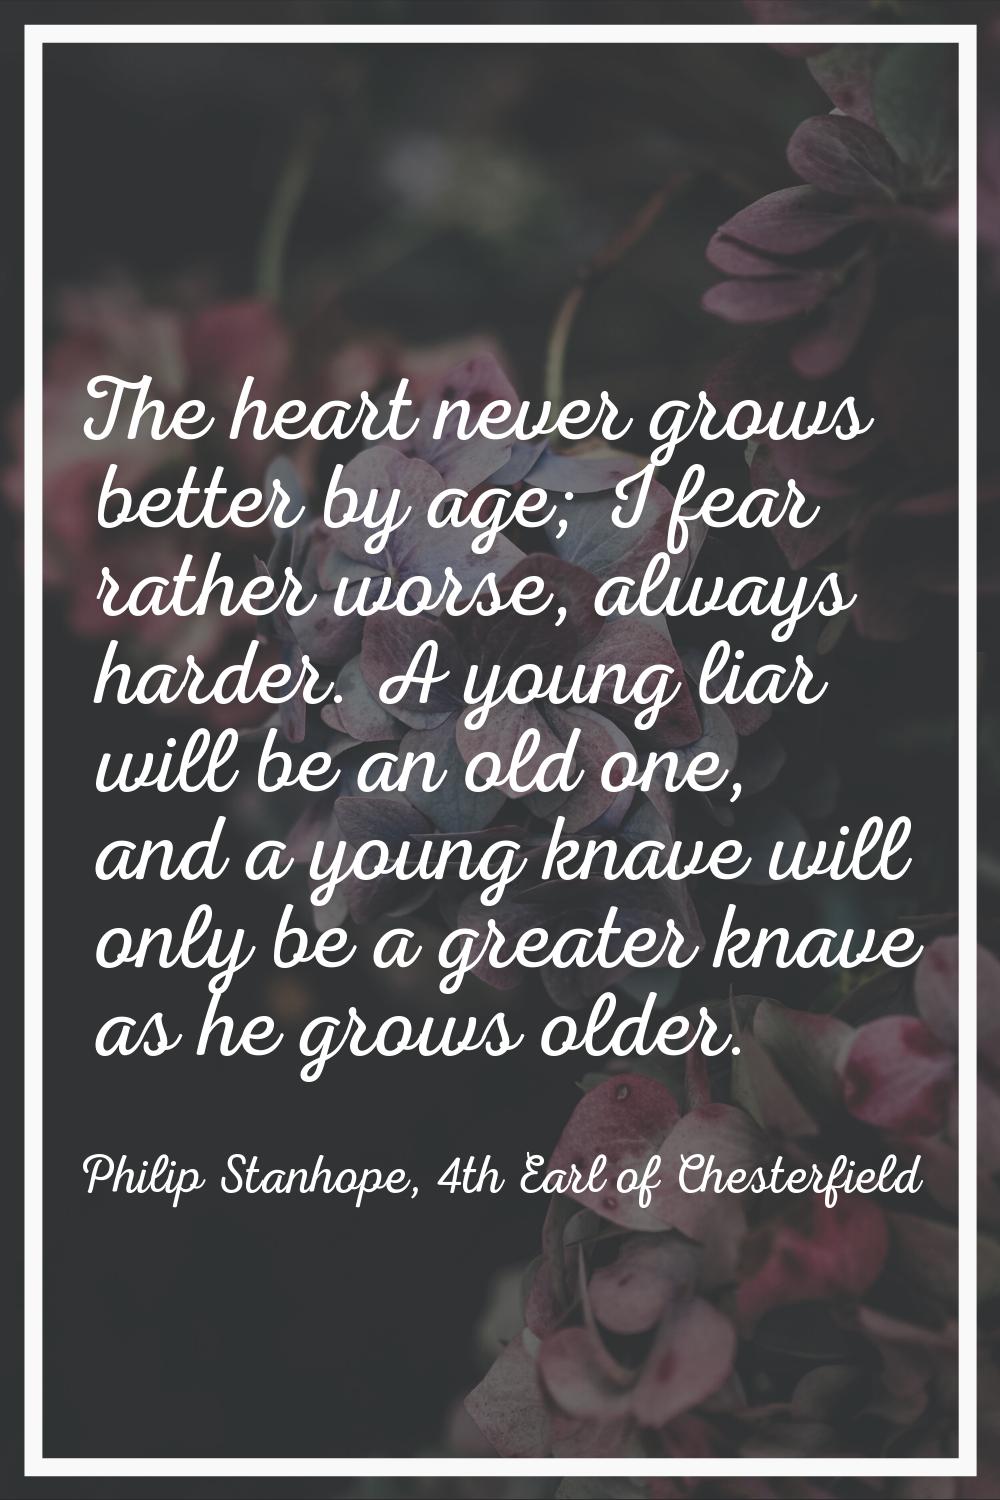 The heart never grows better by age; I fear rather worse, always harder. A young liar will be an ol